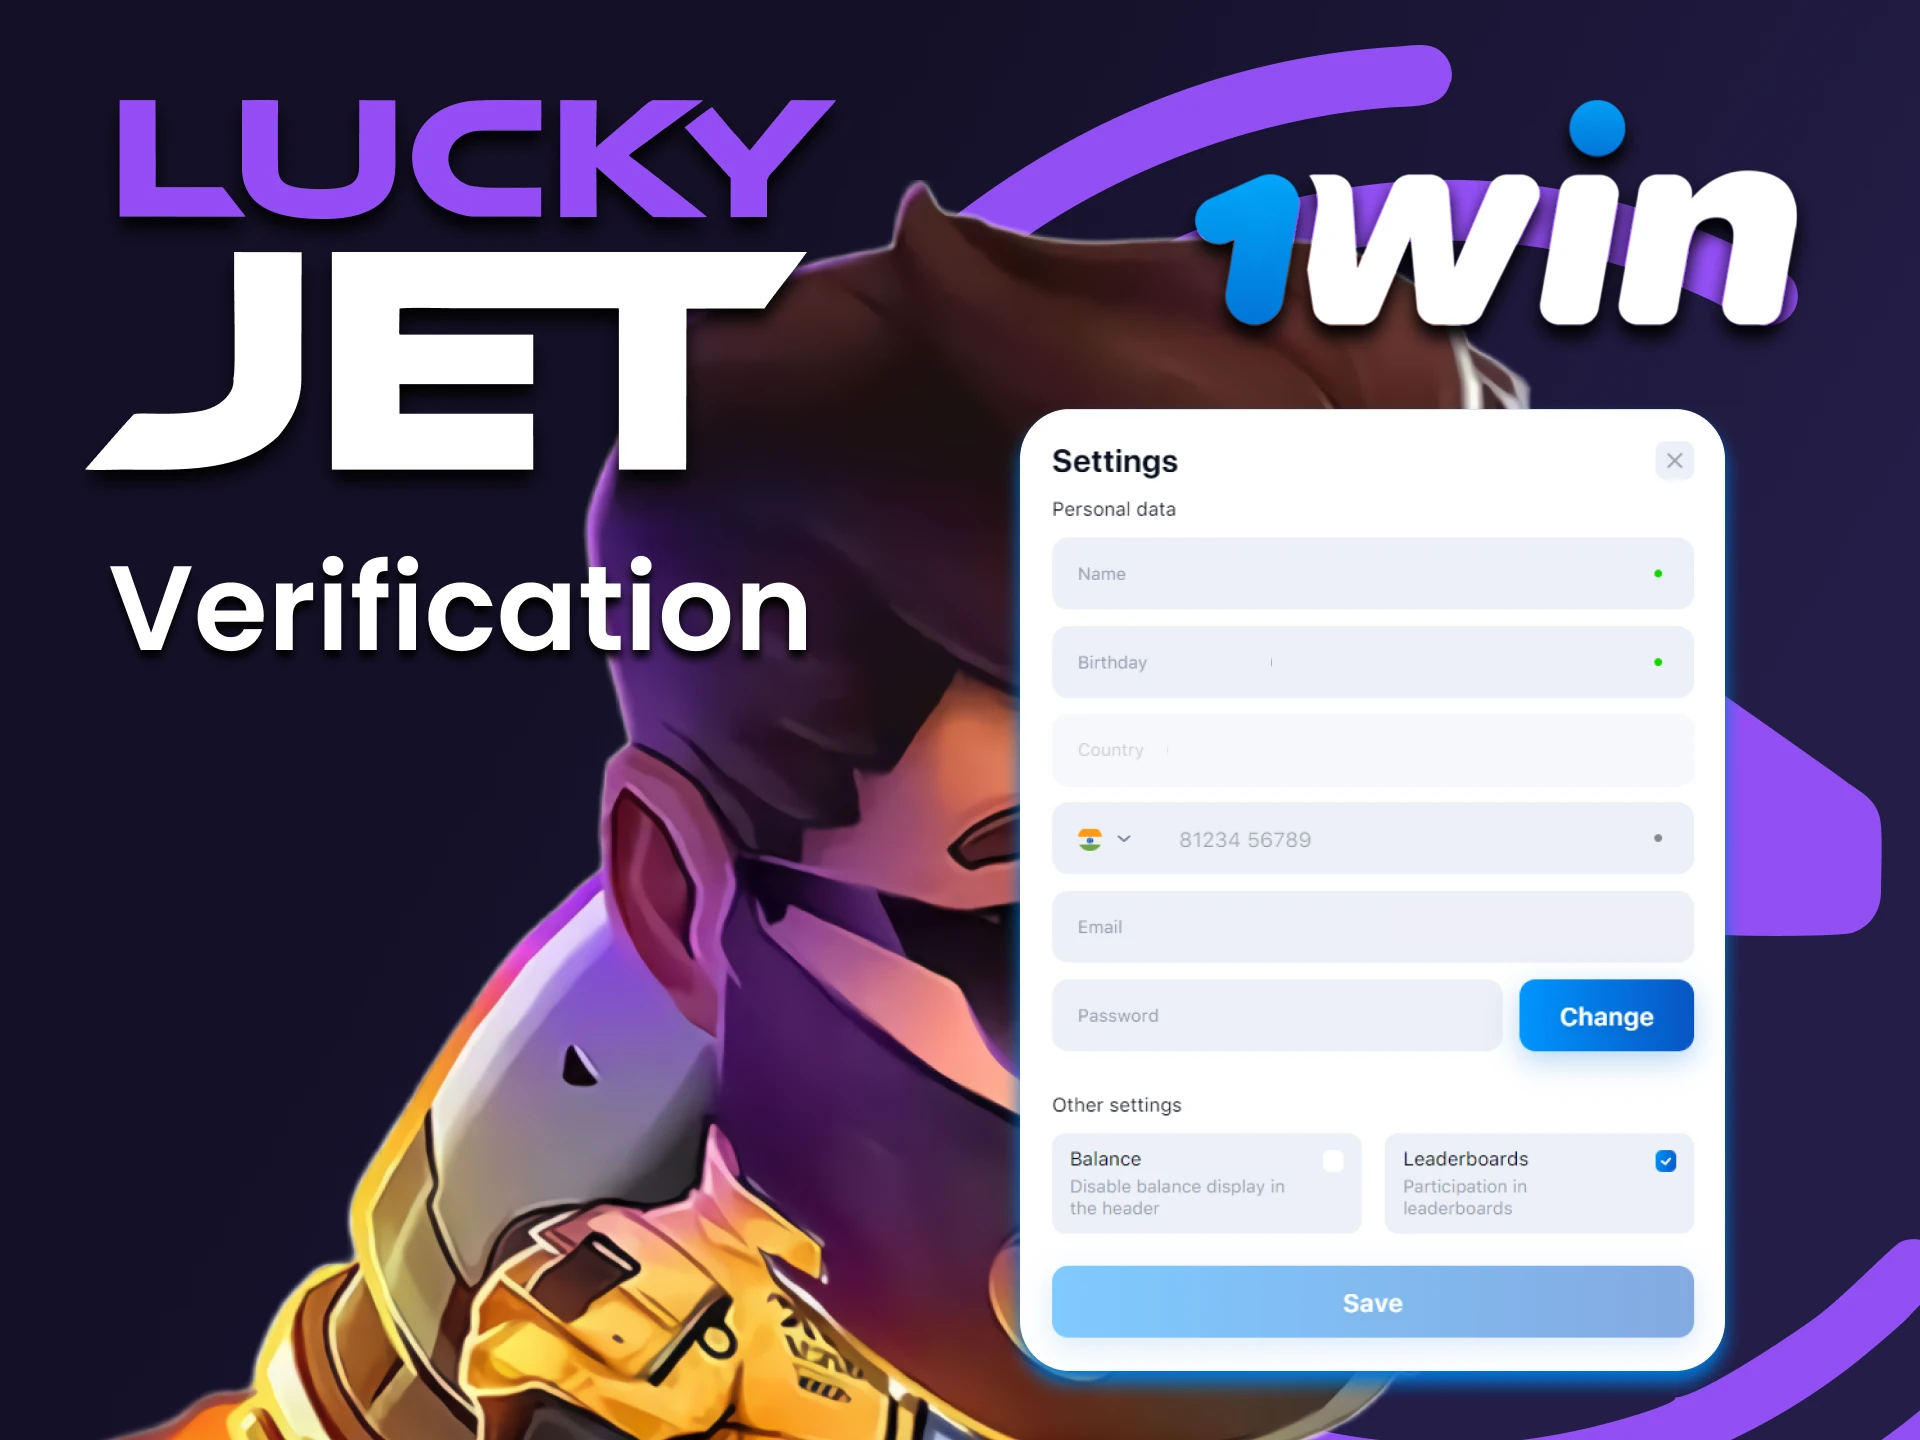 It is necessary to fill in personal data to play Lucky Jet on 1win.